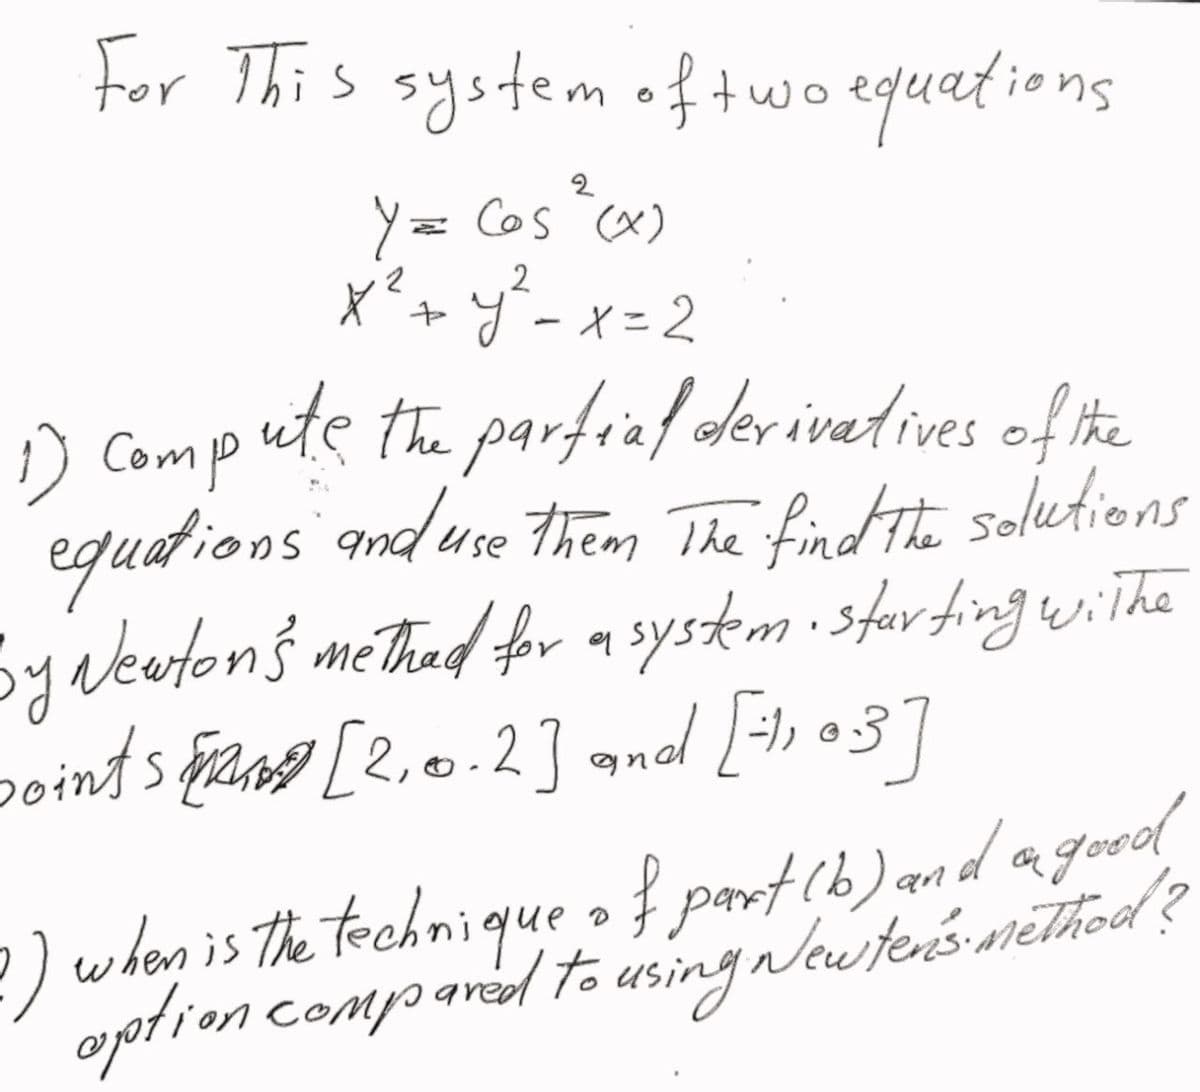 ions
For This system of two equatio
2
Y = Cos (x)
x² + y² = x=2
1) Compute the partial derivatives of the
equations and use them the find the solutions
Sy
by Newton's methad for a system - starting withe
soints [2.0.2] and [=1103]
1) when is the technique of part (b) and a good
aption compared to using Newter's method ?